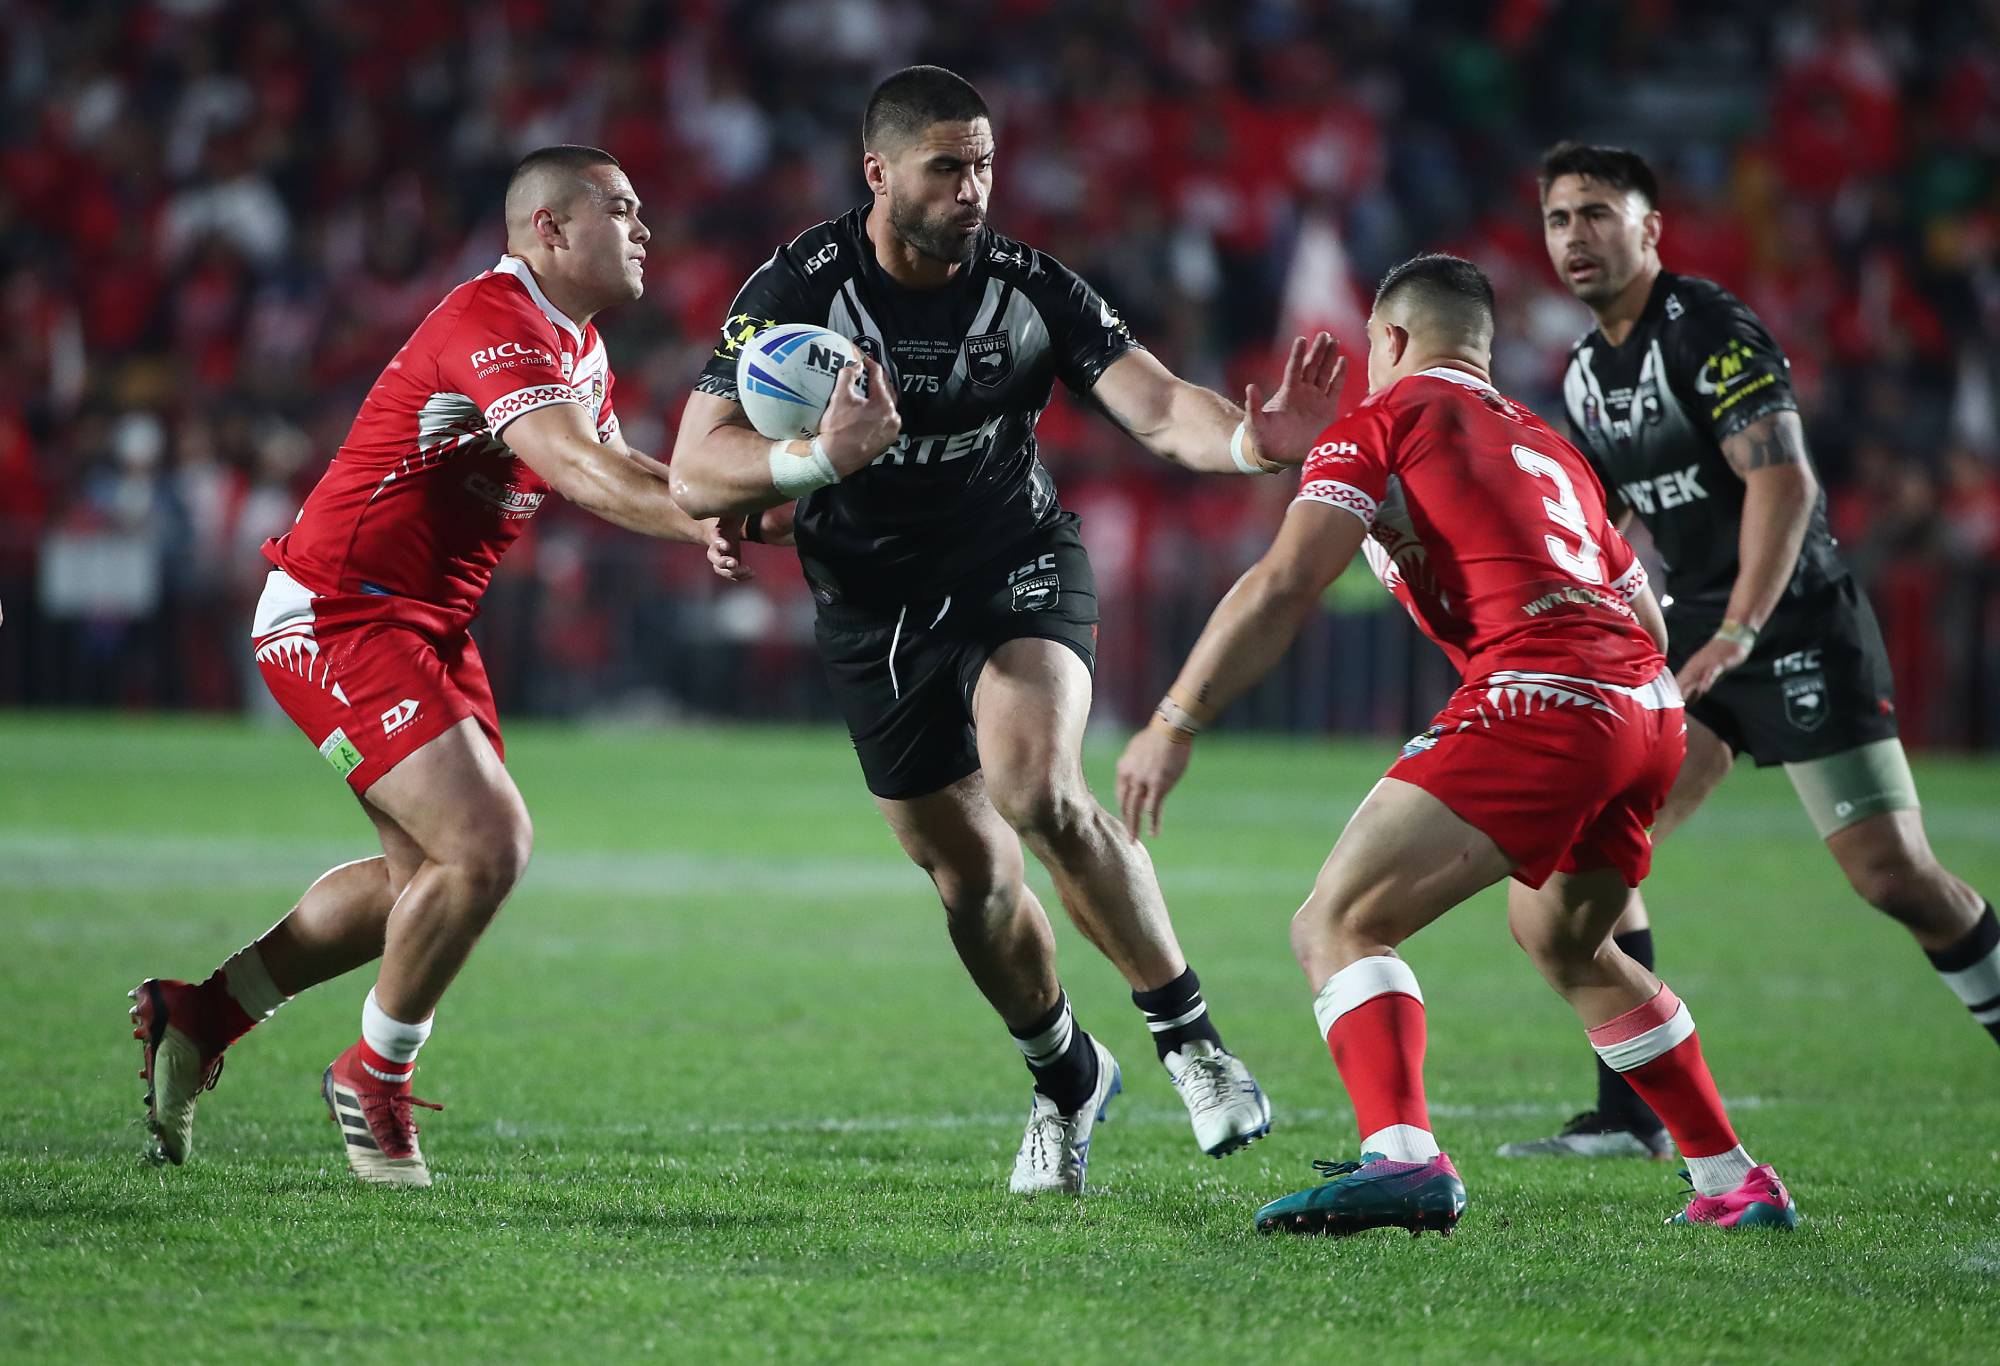 AUCKLAND, NEW ZEALAND - JUNE 22: Jesse Bromwich of the Kiwis (C) is tackled during the Oceania league test between the Kiwis and Mate Ma'a Tonga at Mt Smart Stadium on June 22, 2019 in Auckland, New Zealand. (Photo by Fiona Goodall/Getty Images)